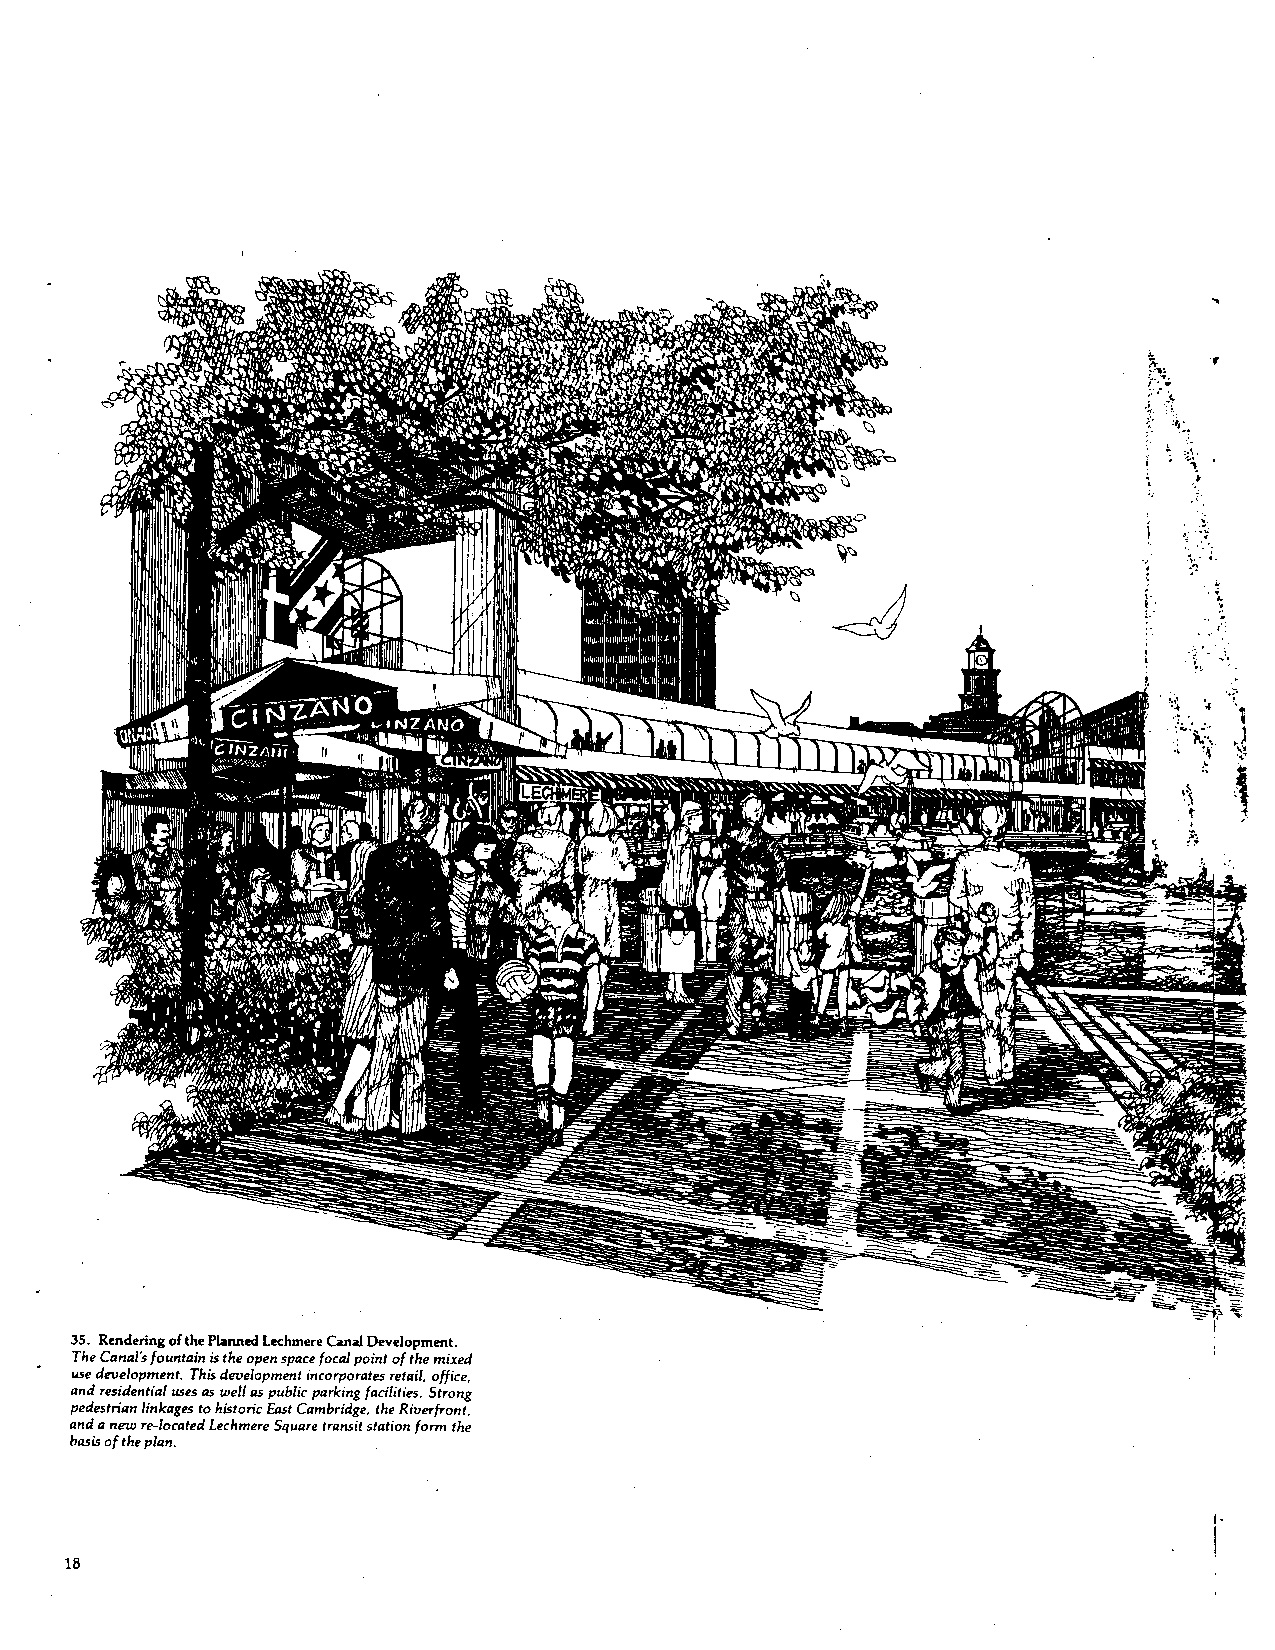  Illustrations from Historic East Cambridge Riverfront Plan 